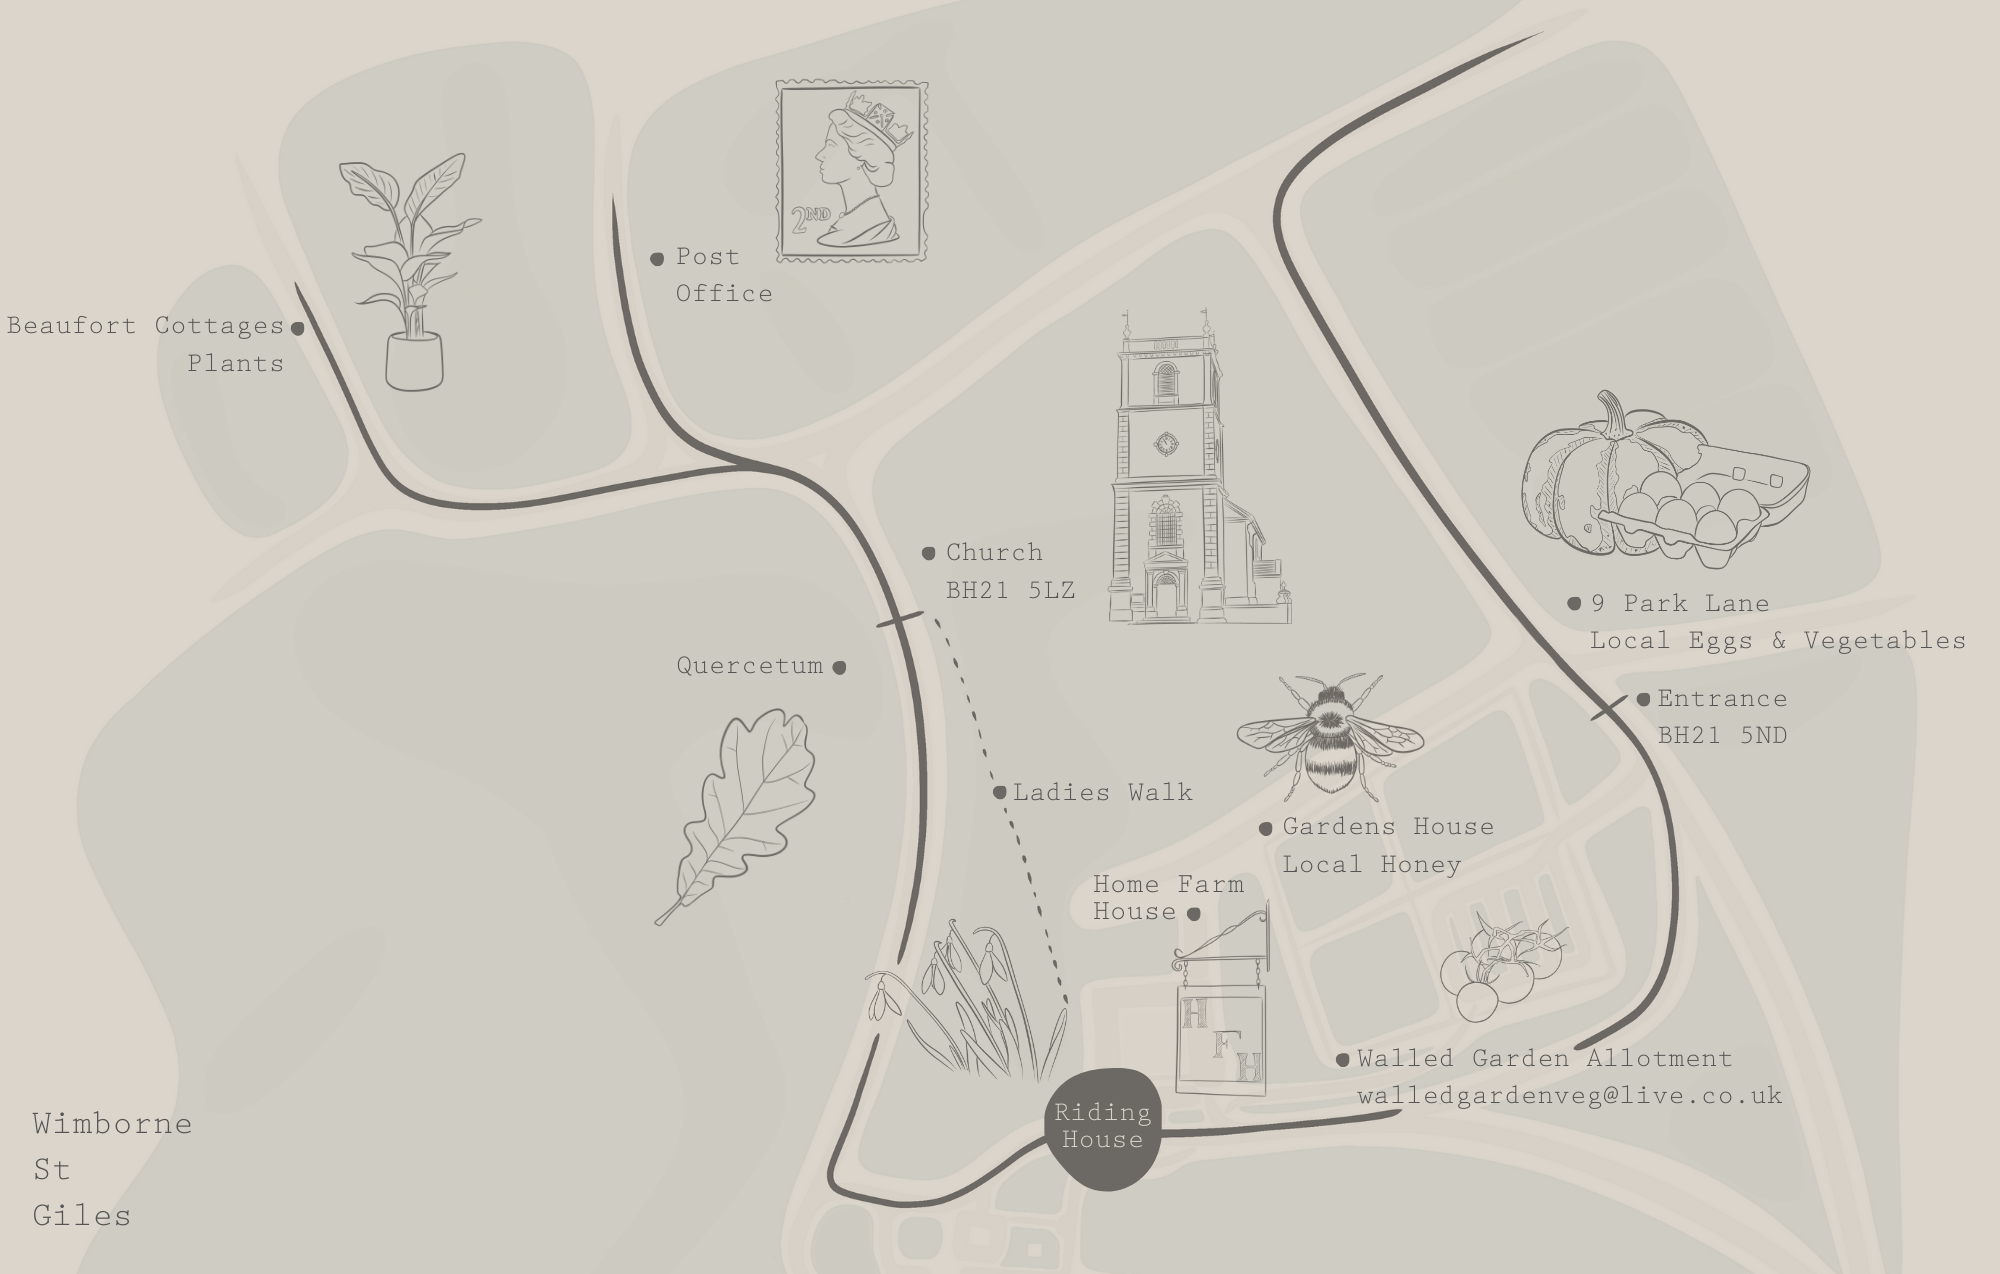 Close Up Map of St Giles Estate and Local Attractions Surrounding It